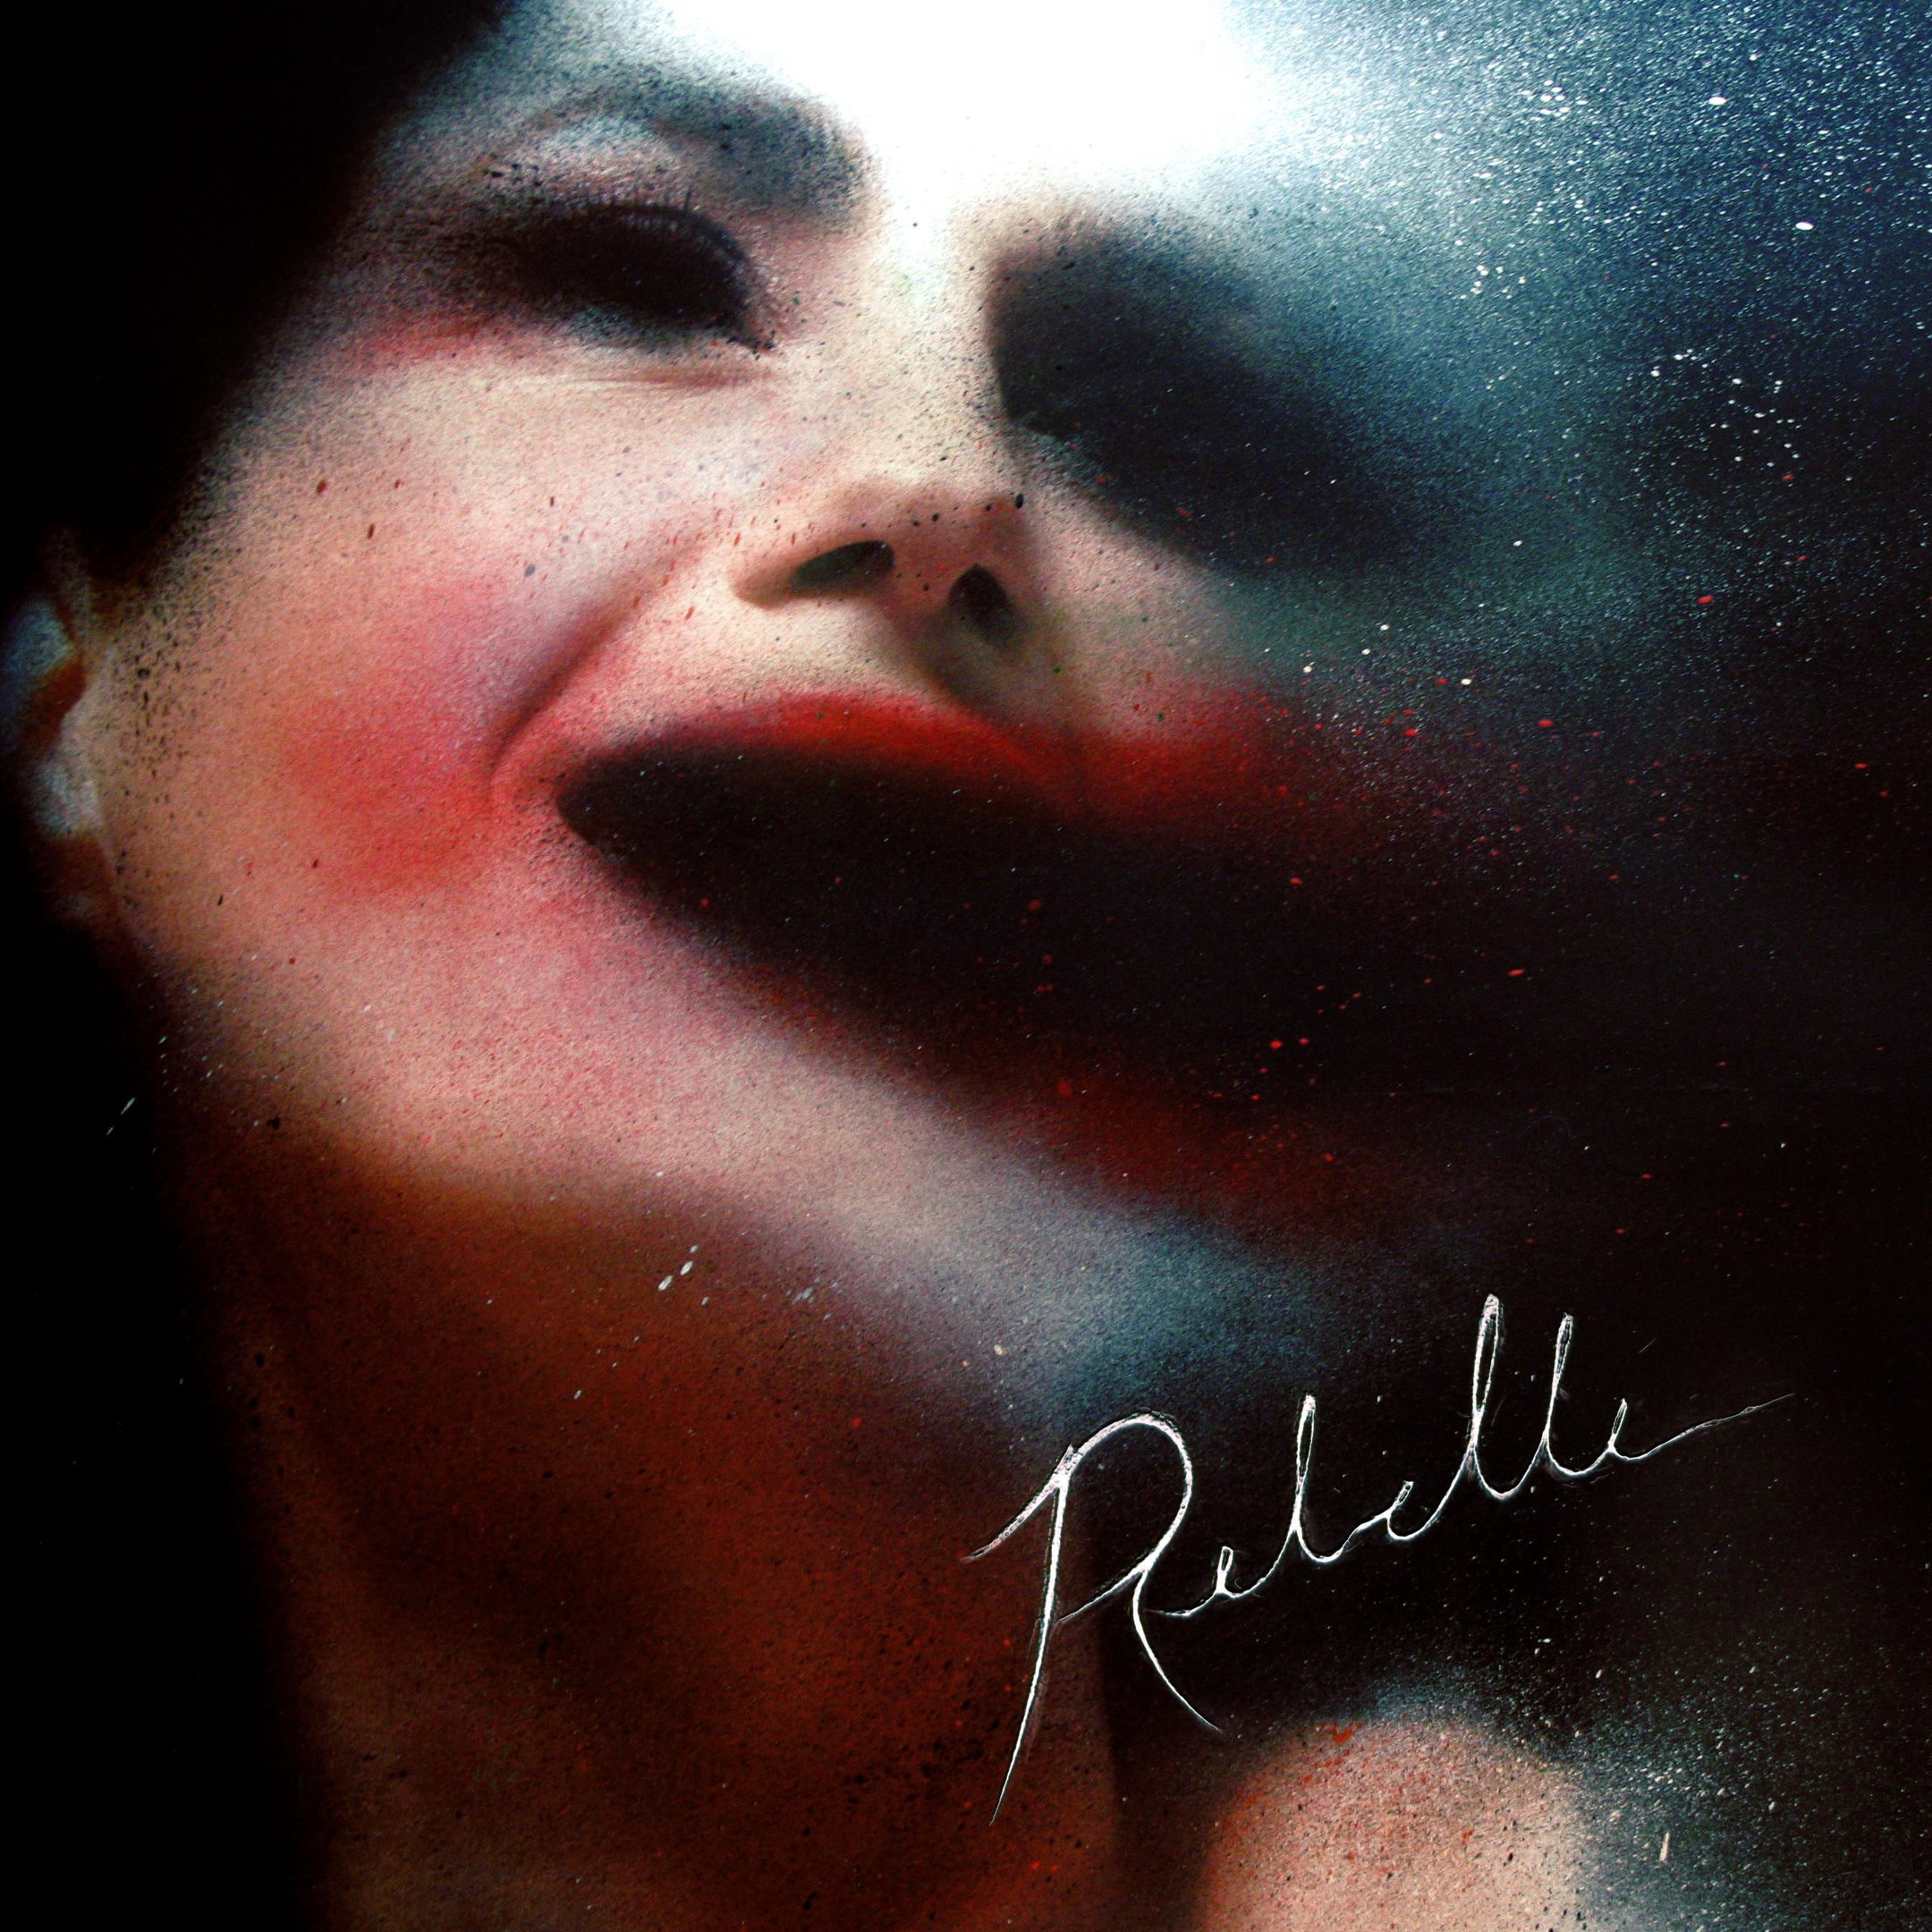 Rebelle - New songs from 